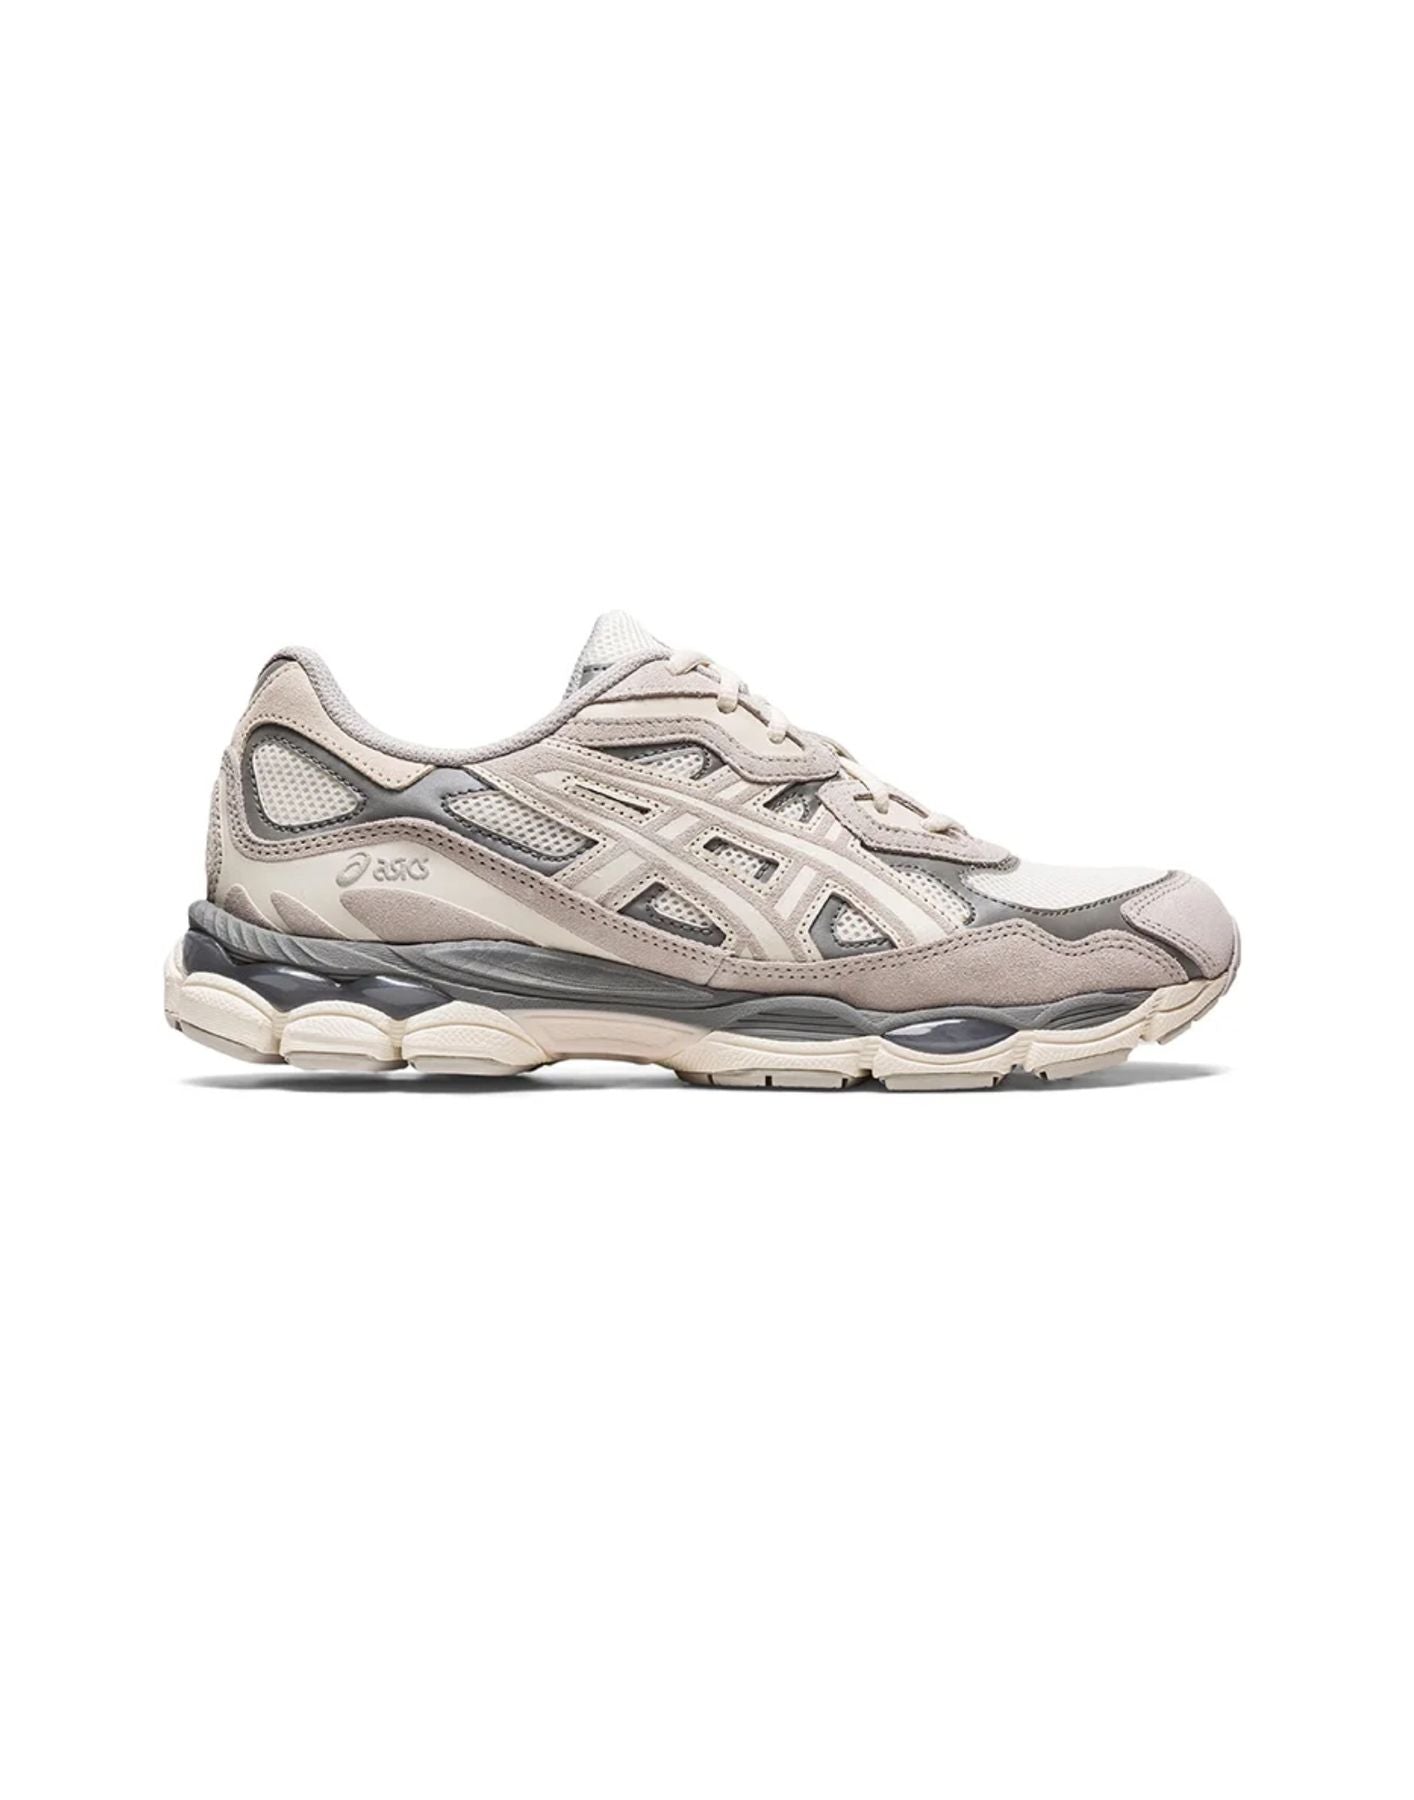 Shoes for man GEL-NYC CREAM/OYSTER GREY M ASICS